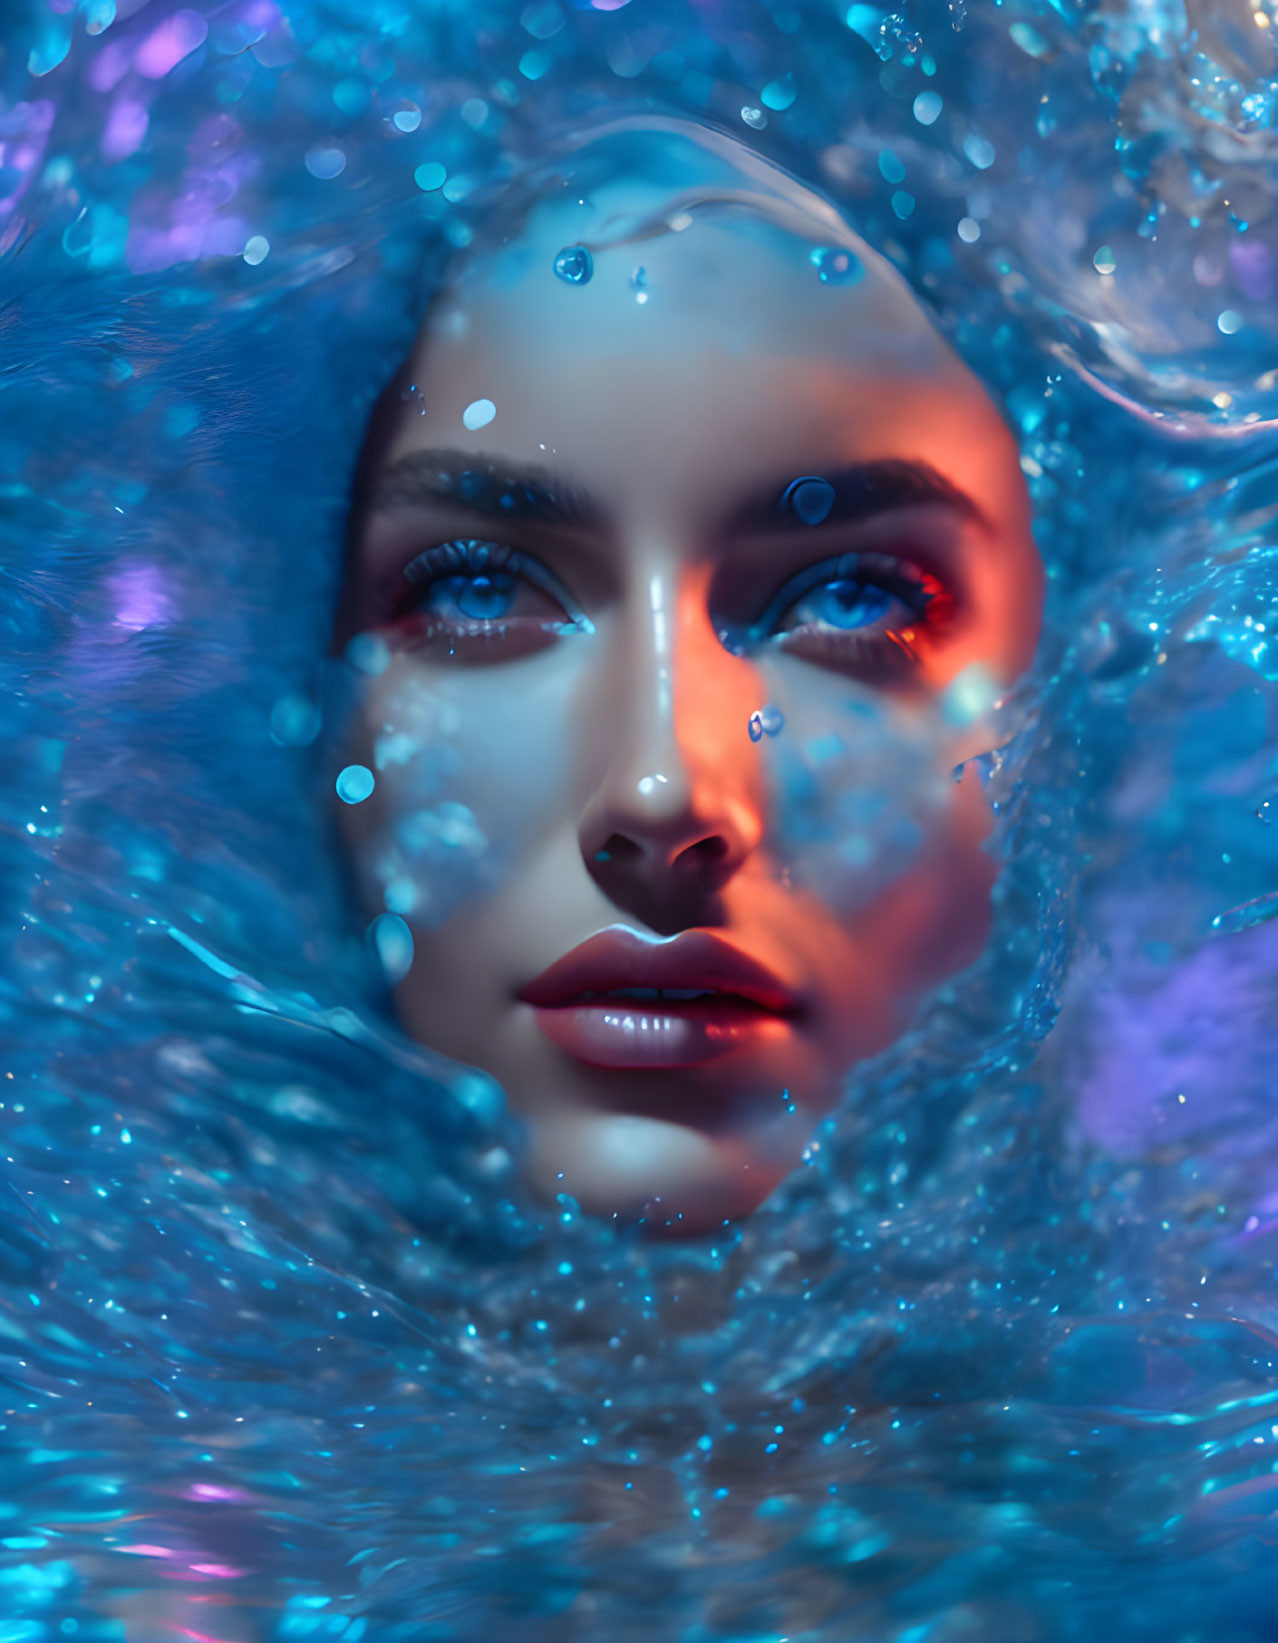 Face of a Woman Emerging from Swirling Blue Water